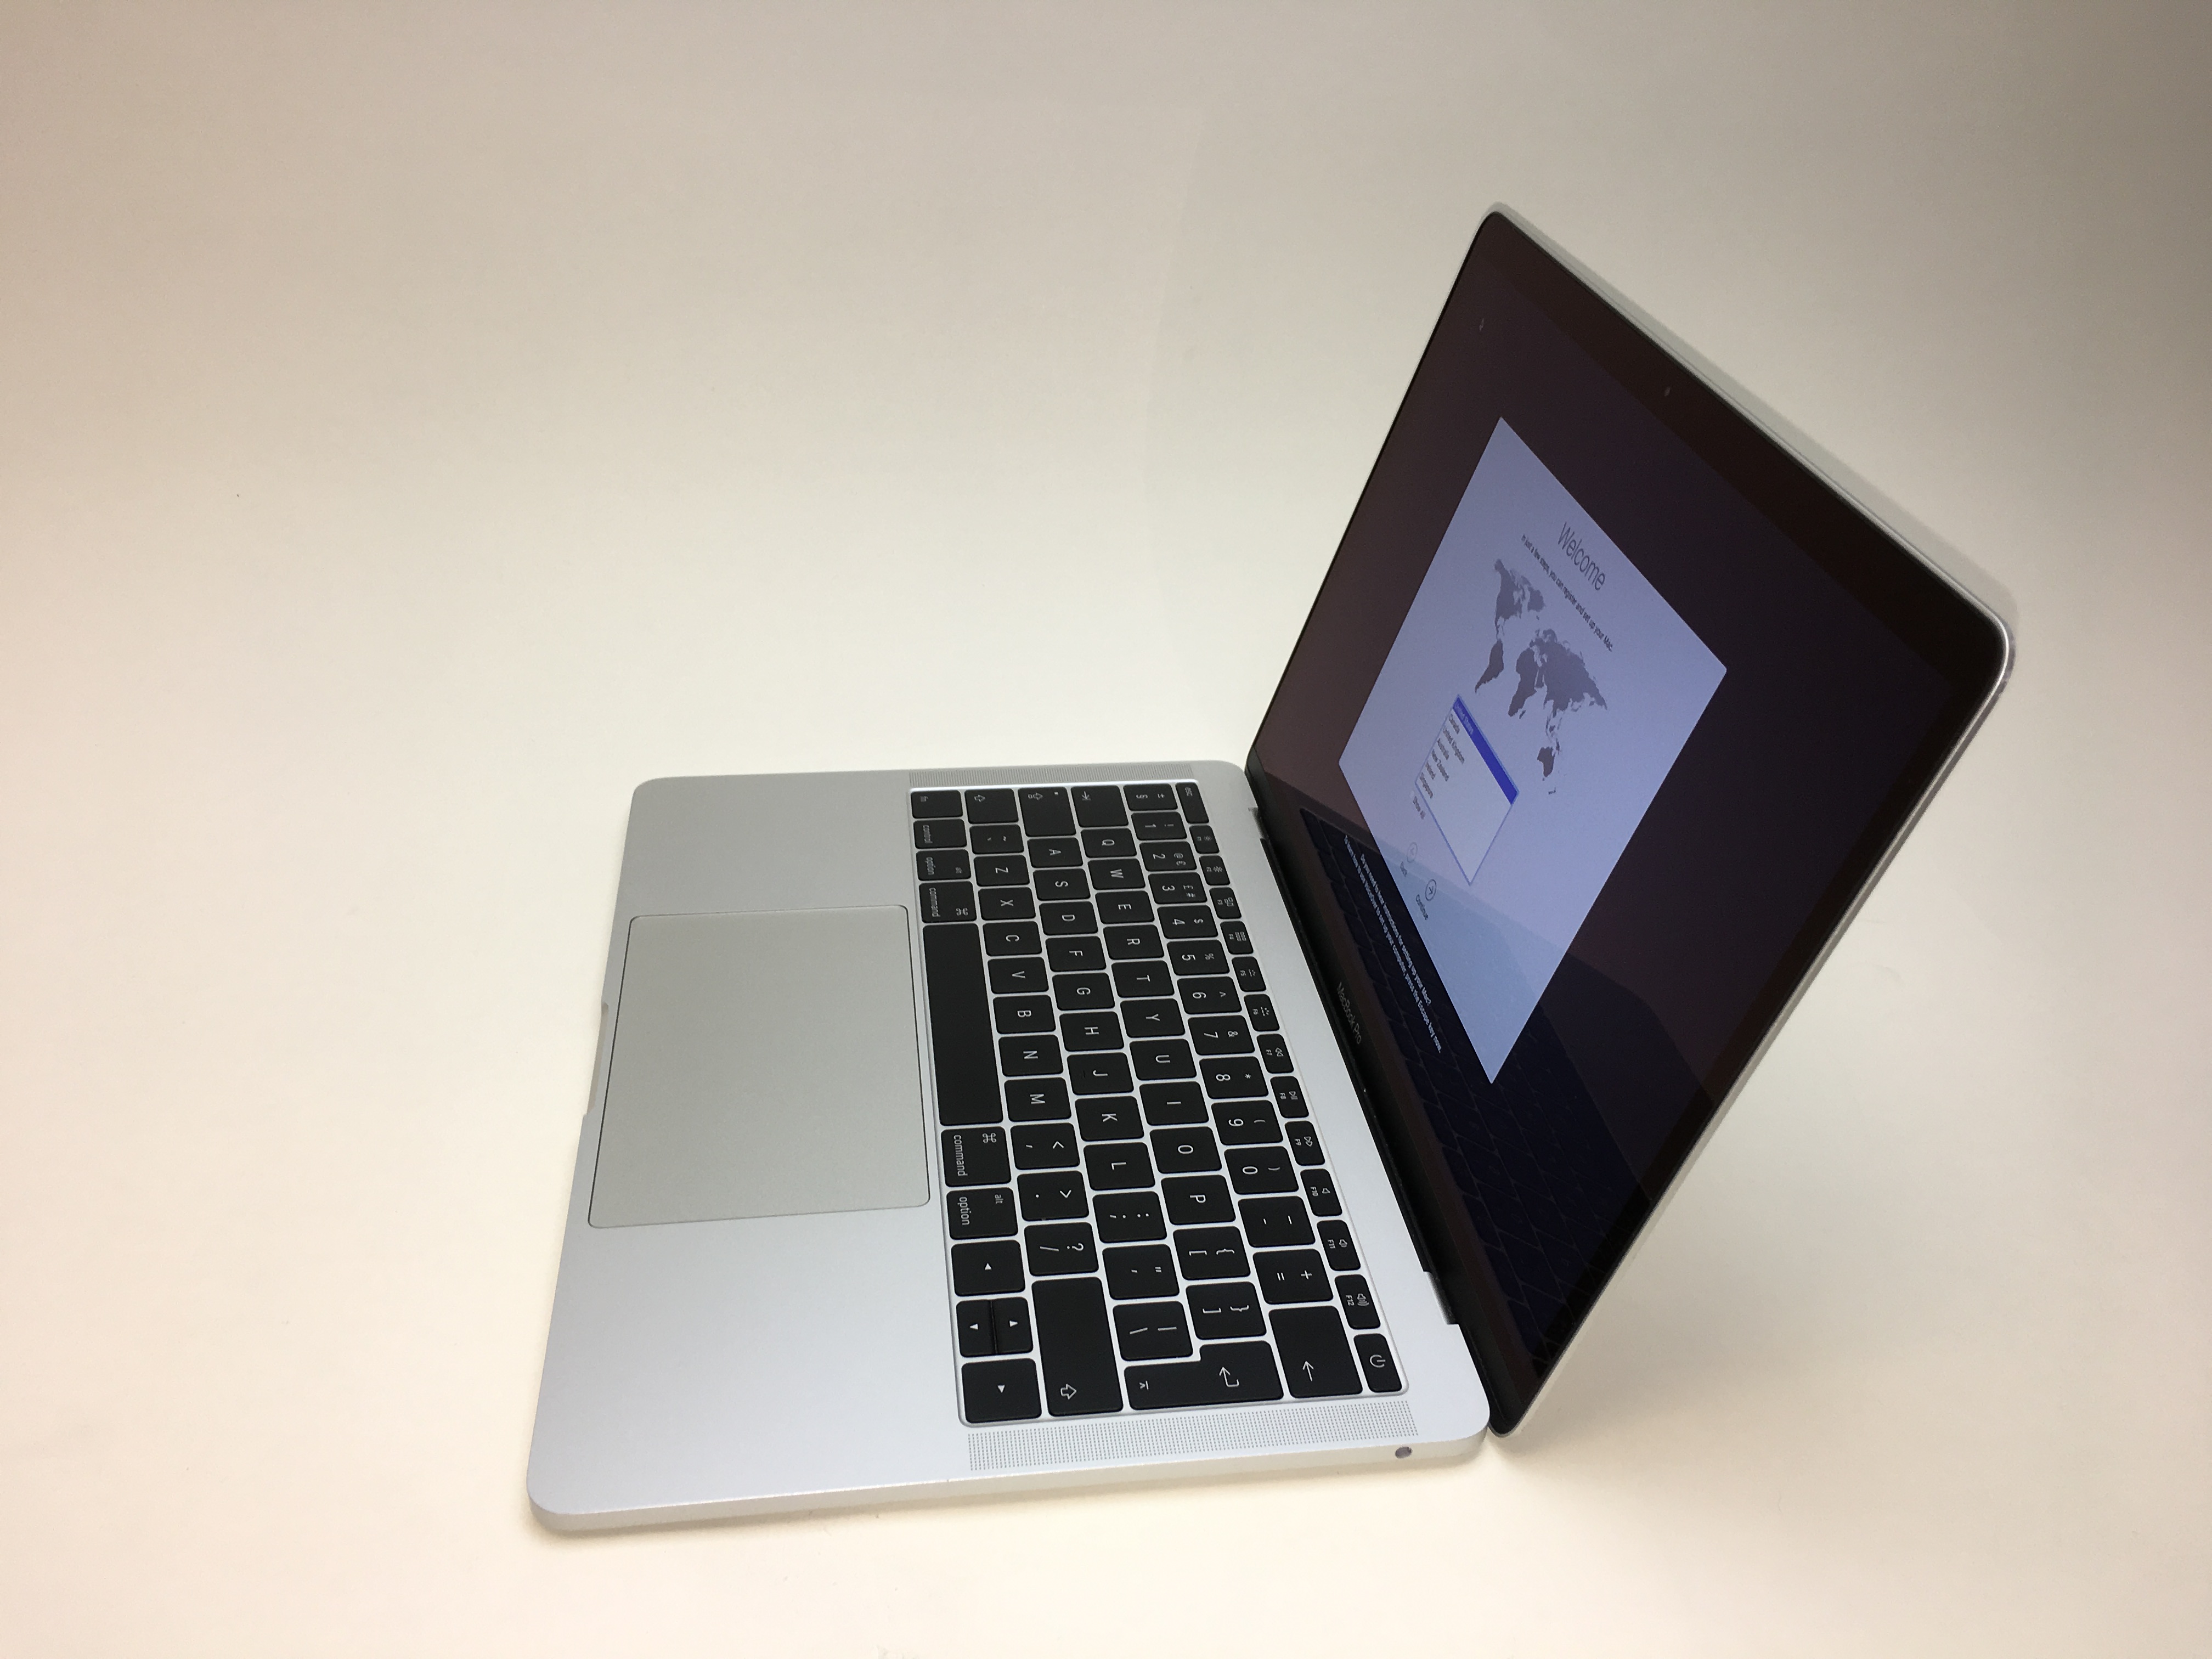 Macbook Pro 13 With Two Thunderbolt 3 Ports Mresell